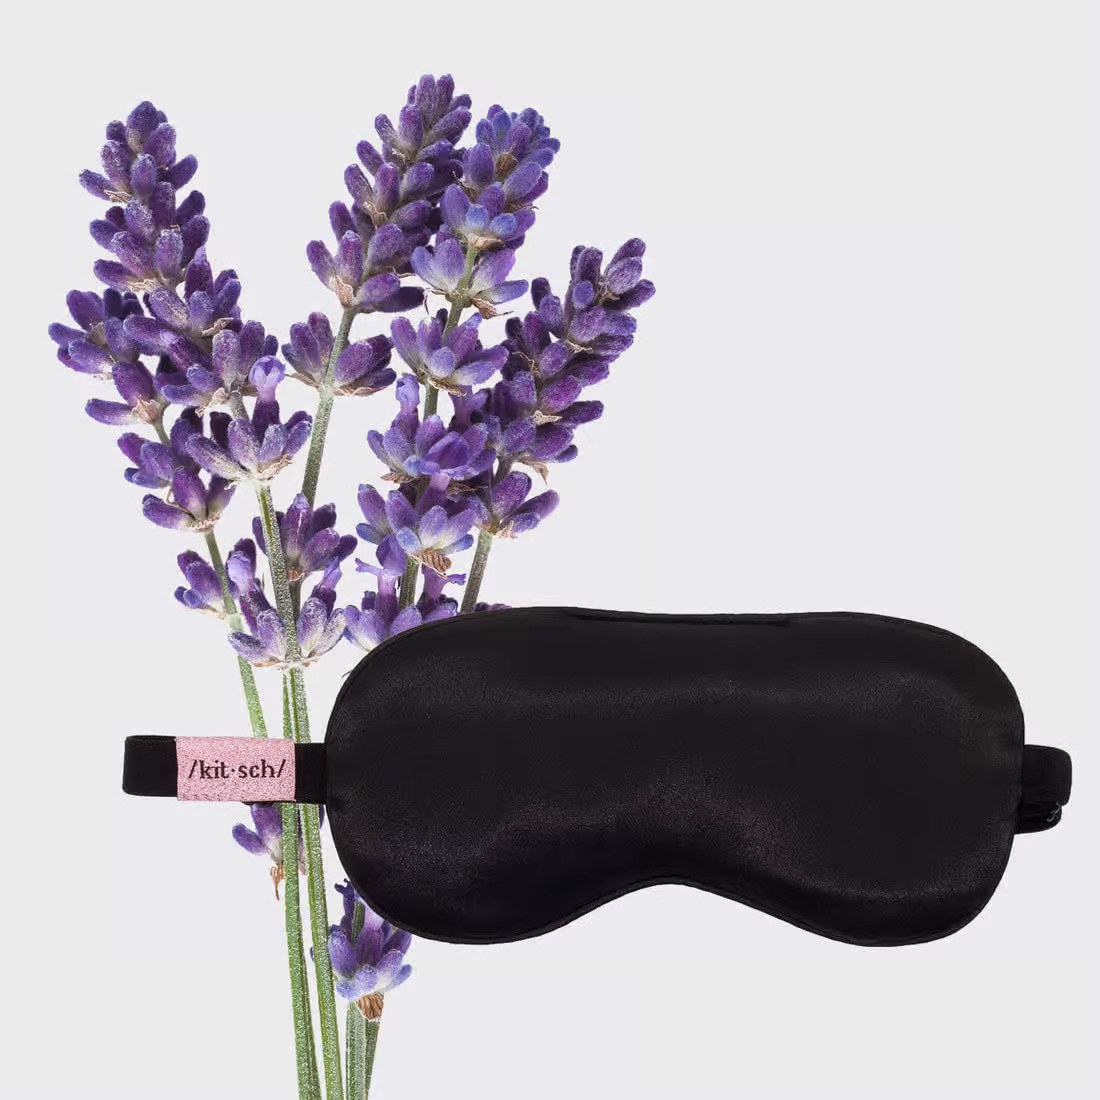 The sleeping mask against a lavender plant